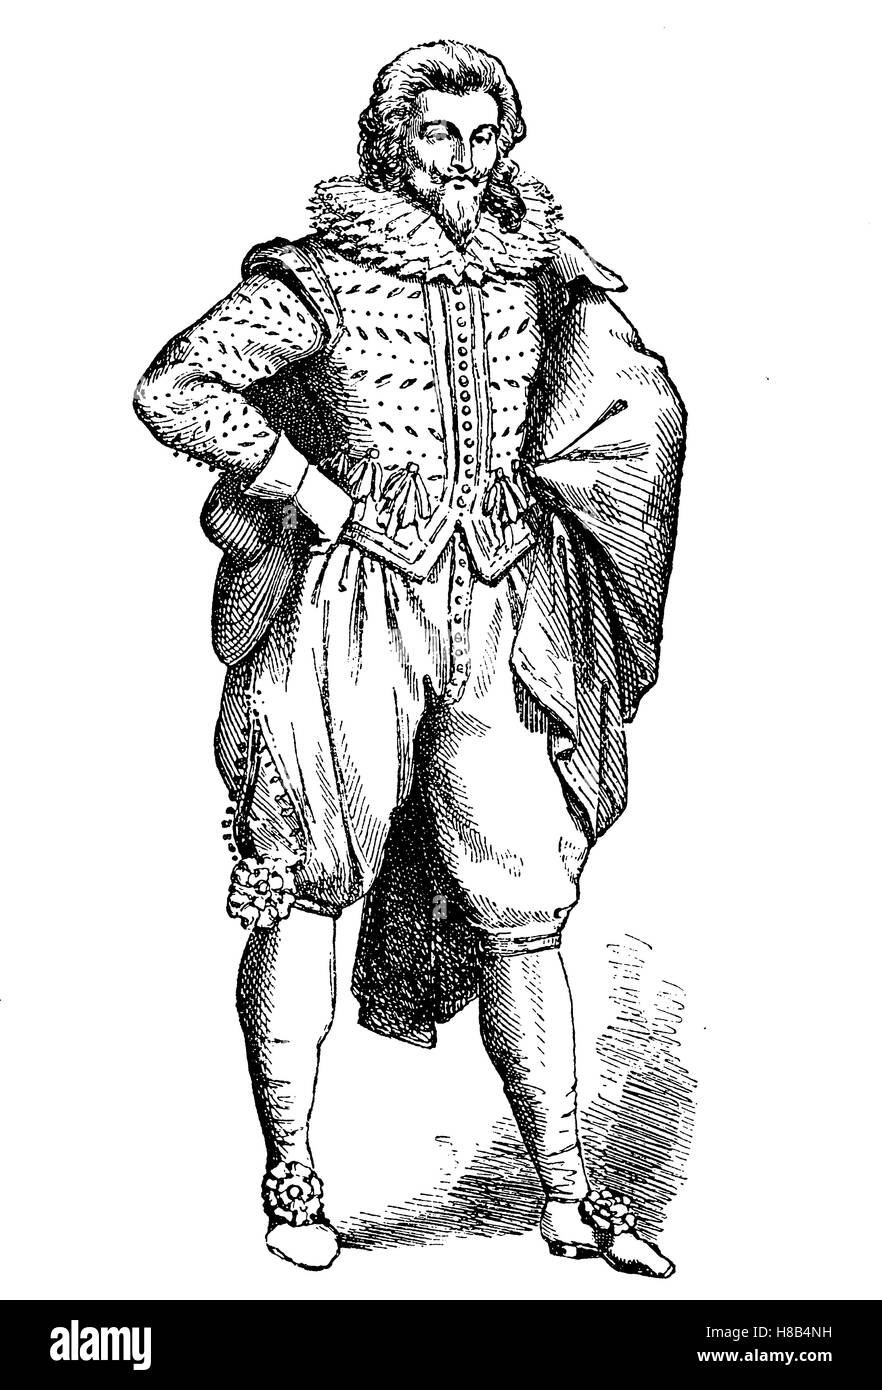 french noble von 1617, with Ruff clothing, History of fashion, costume story Stock Photo